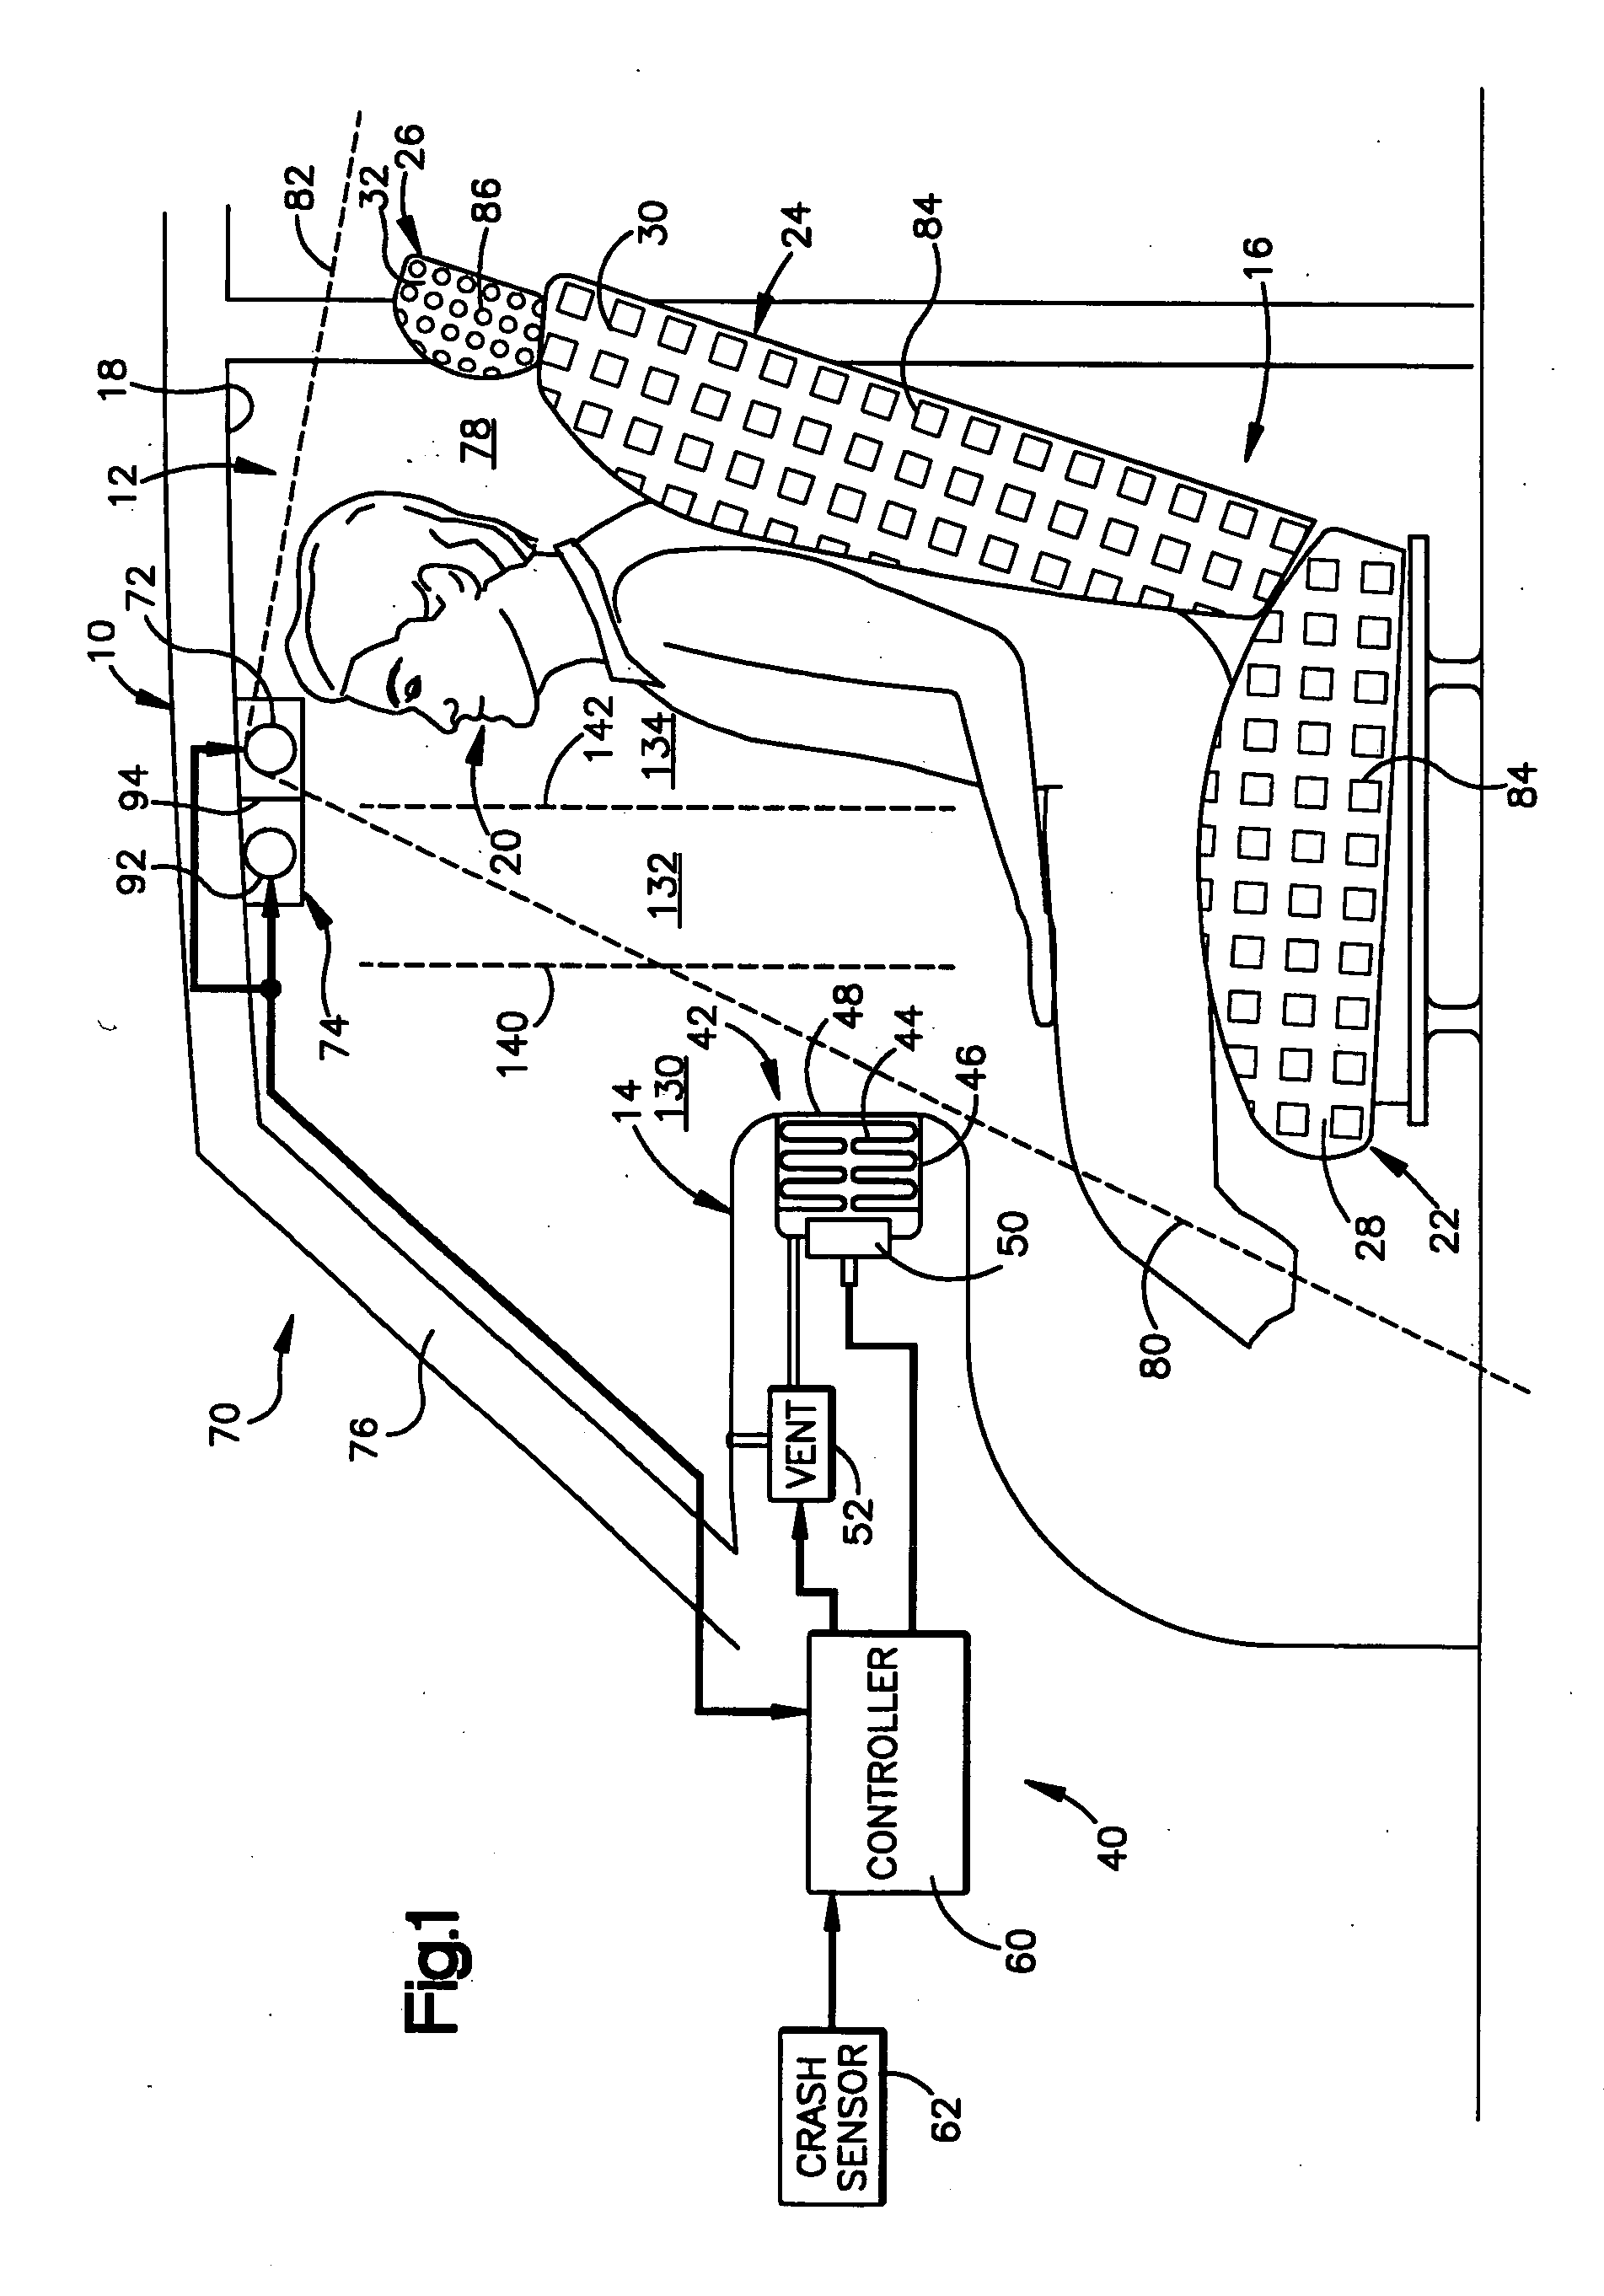 Apparatus and method for controlling an occupant protection system in response to determined passenger compartment occupancy information